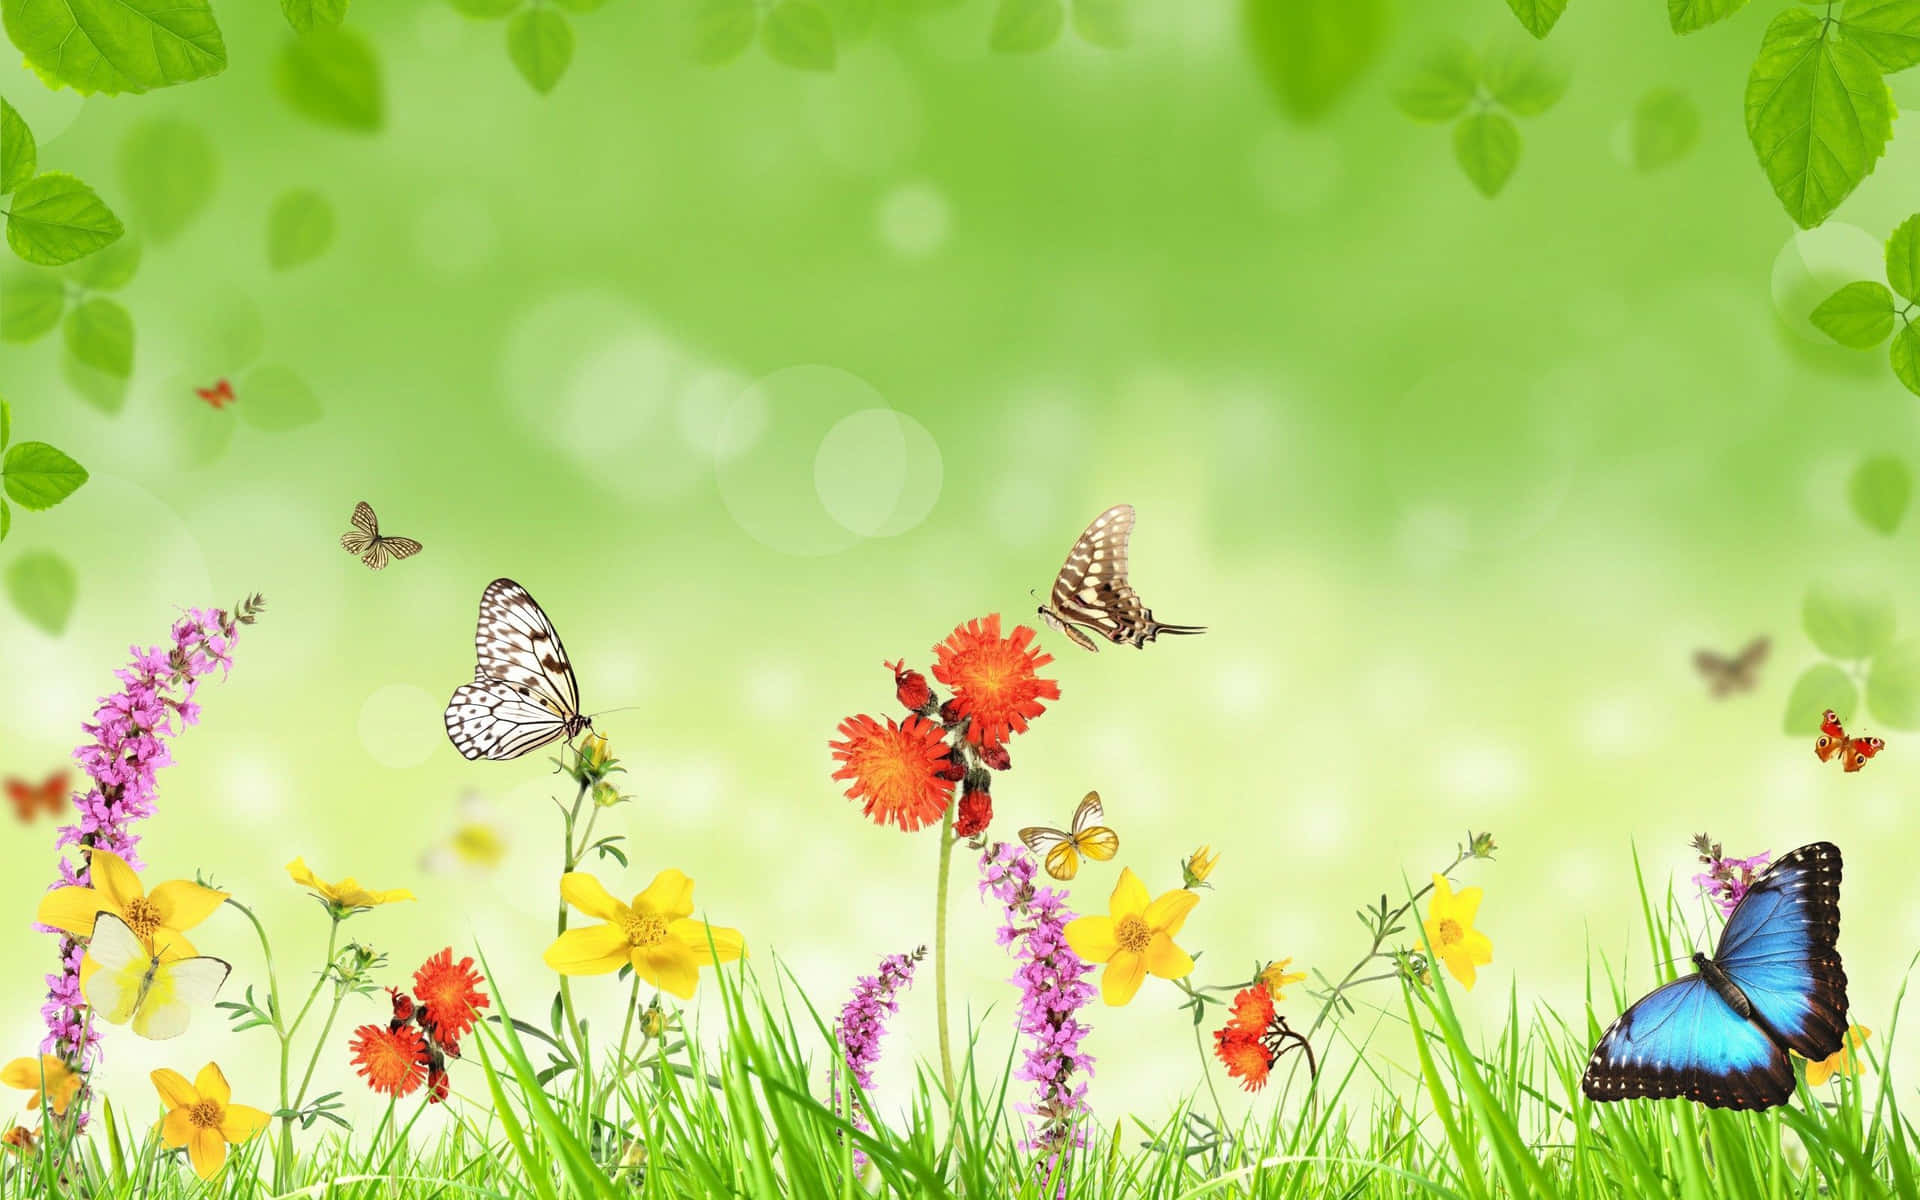 Attract butterflies to your garden with colorful plants! Wallpaper